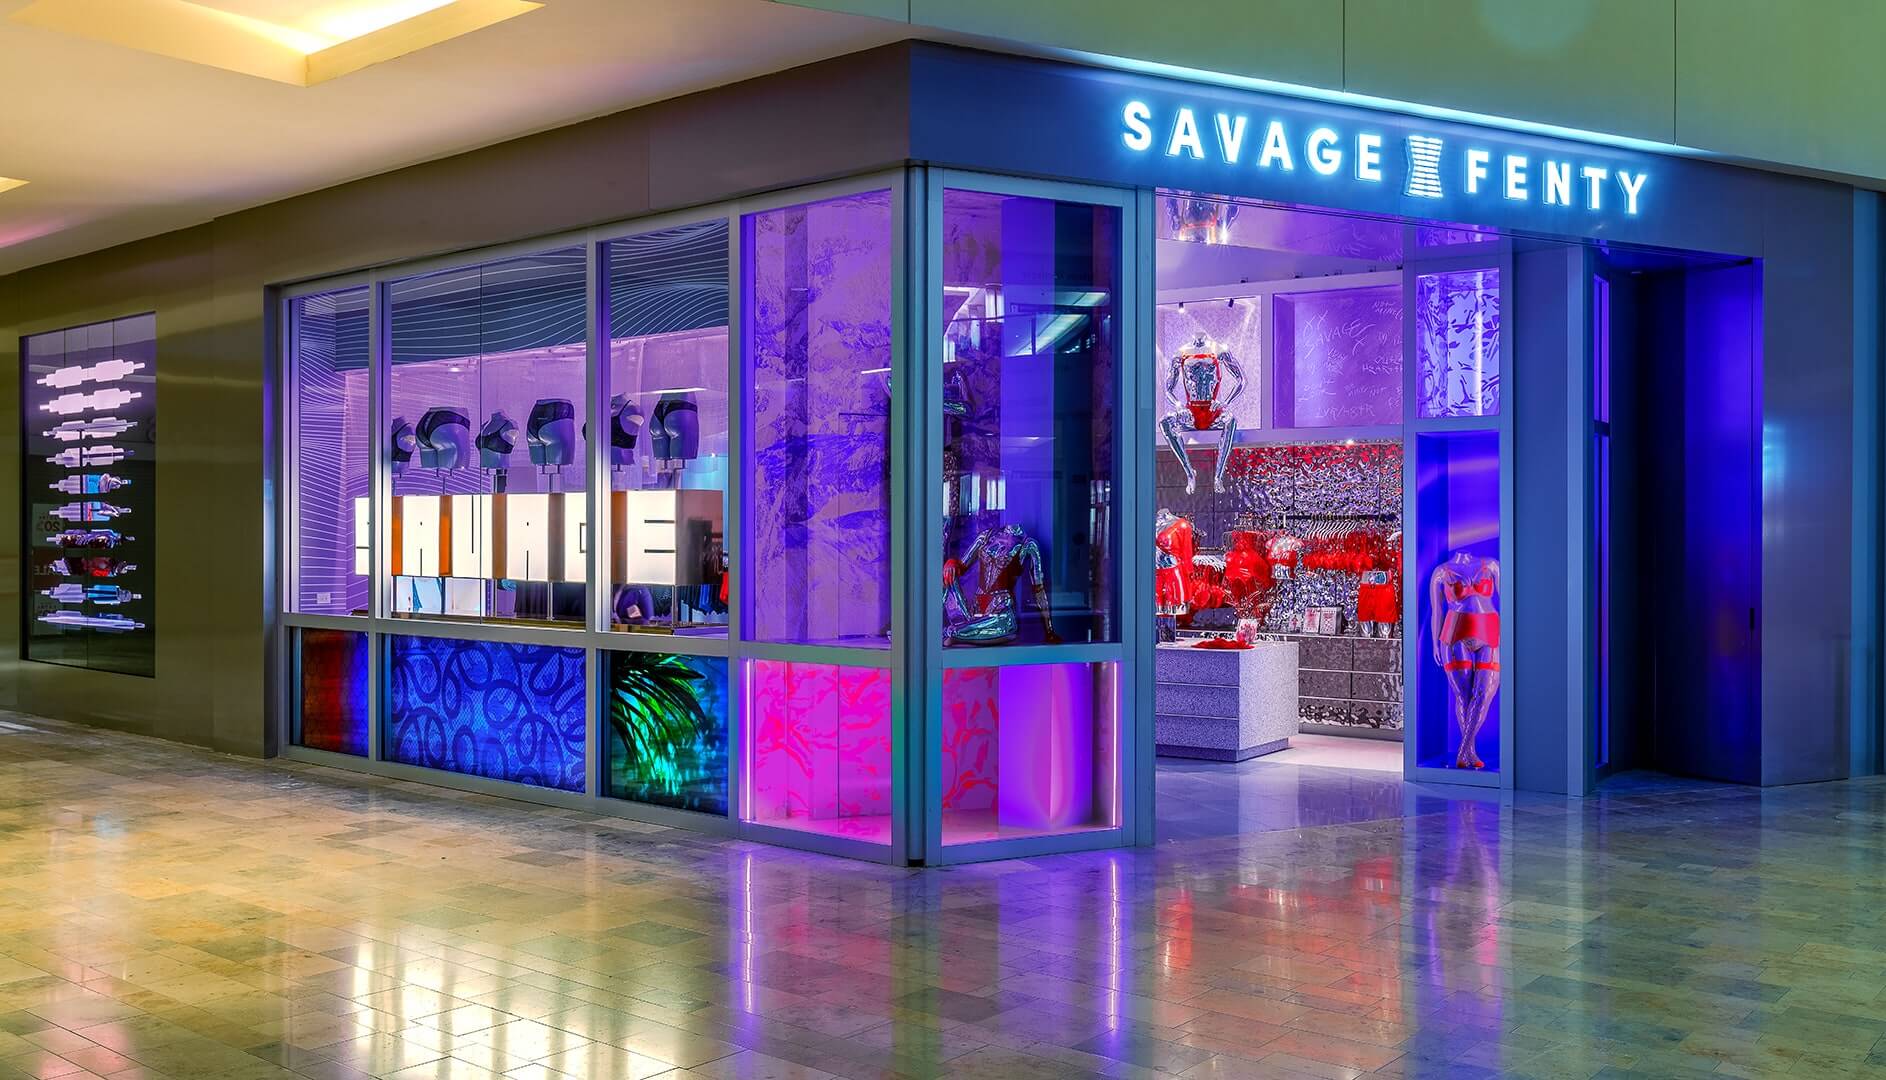 Savage x Fenty Stores Continue To Expand In 2022